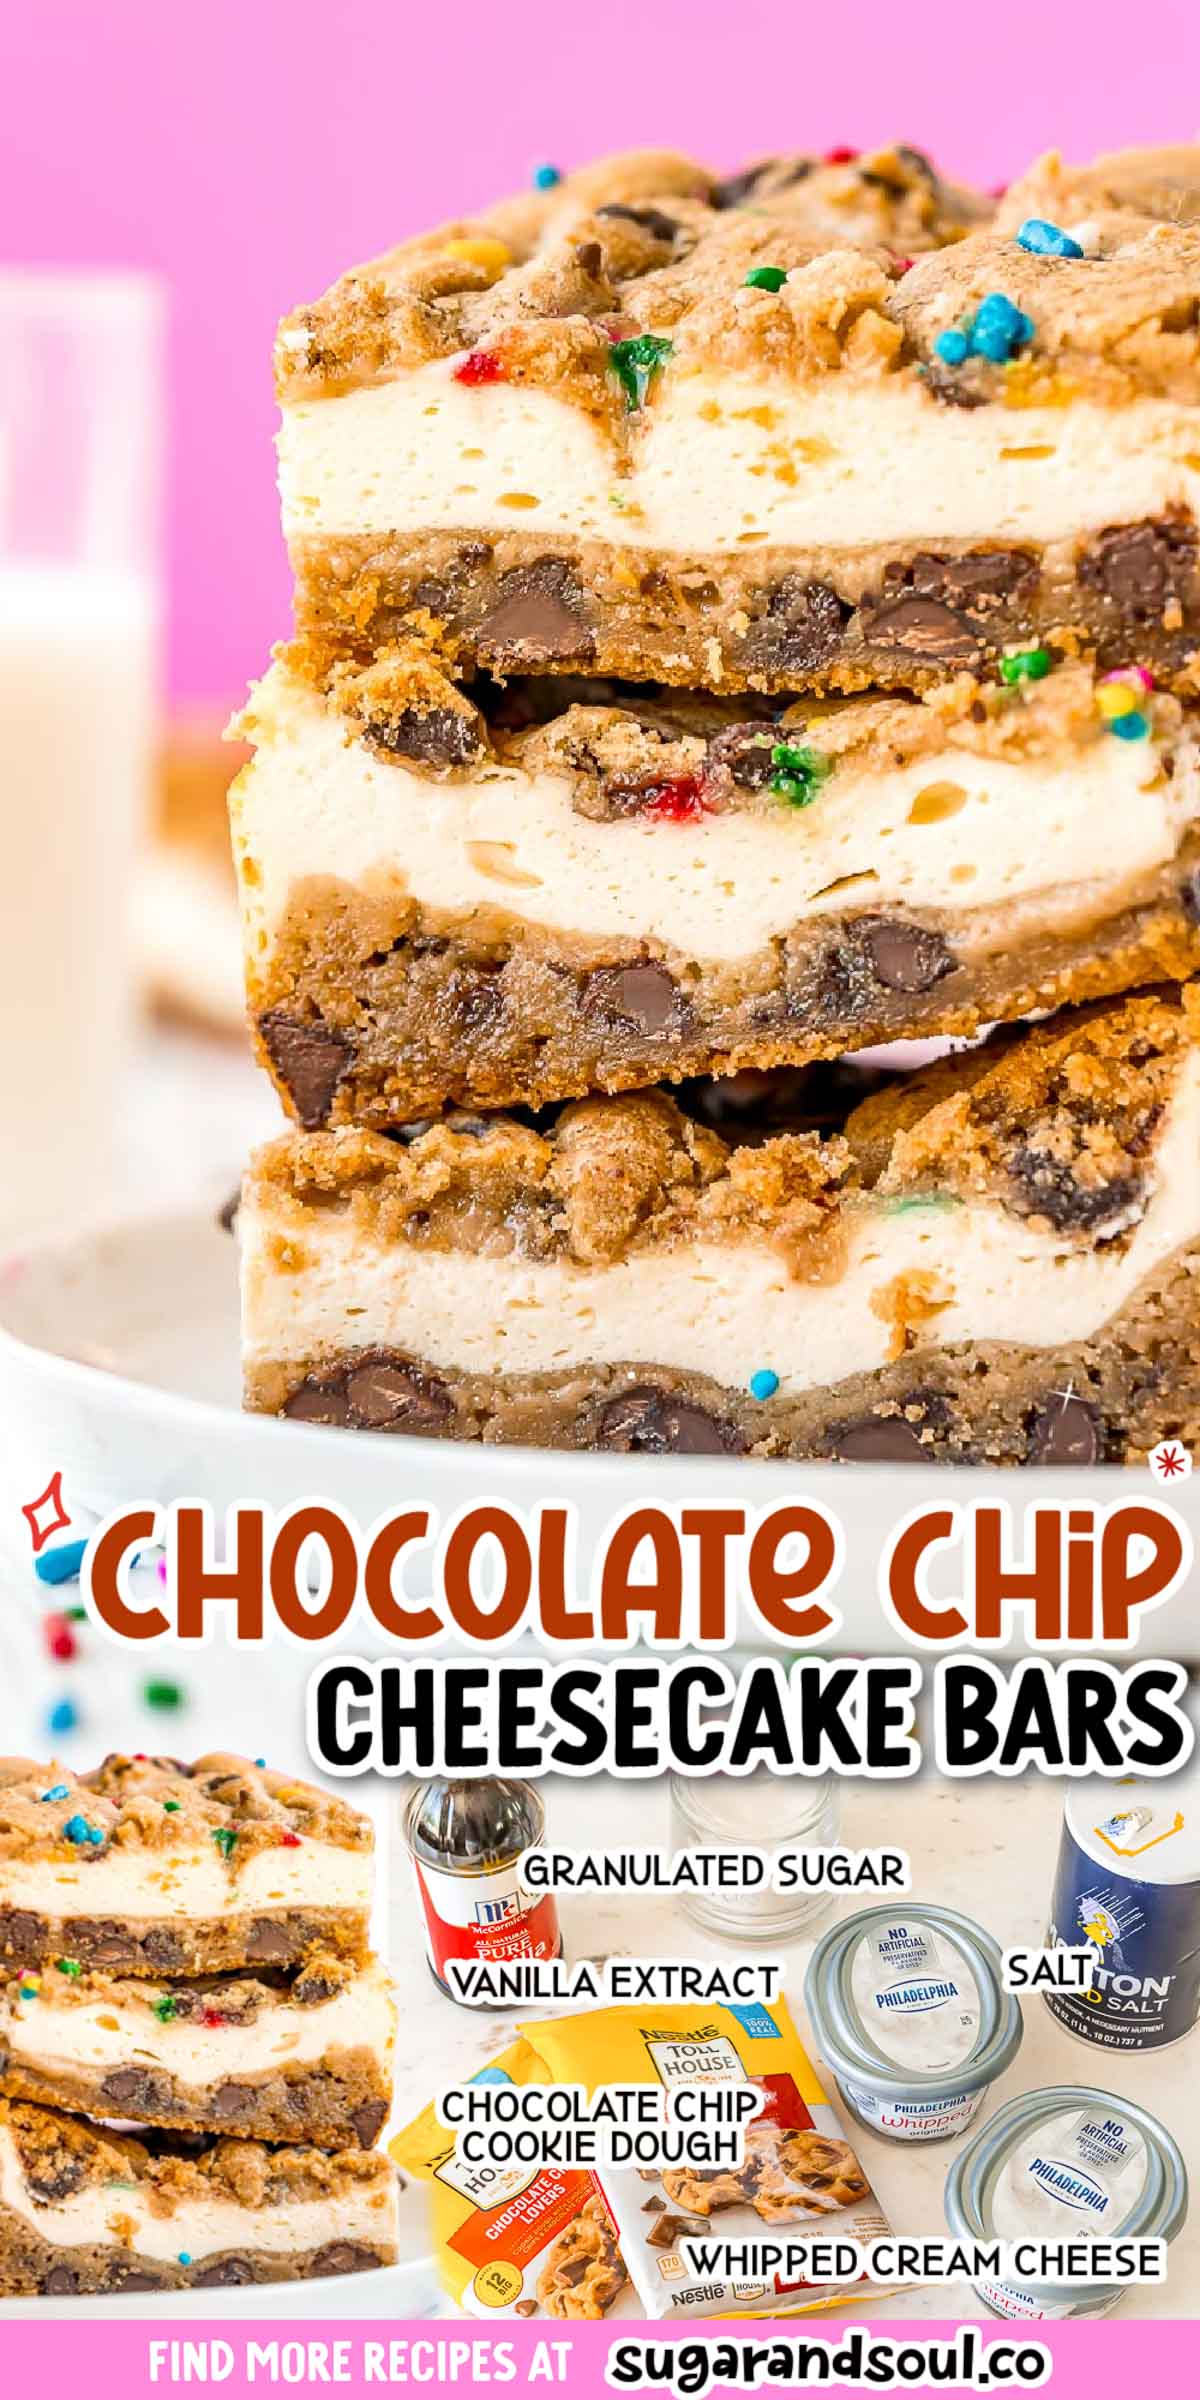 Chocolate Chip Cheesecake Bars consists of cream cheese filling sandwiched between two chocolate chip cookie layers. Made with just four ingredients, prep is a cinch, thanks to refrigerated chocolate chip cookie dough!  via @sugarandsoulco